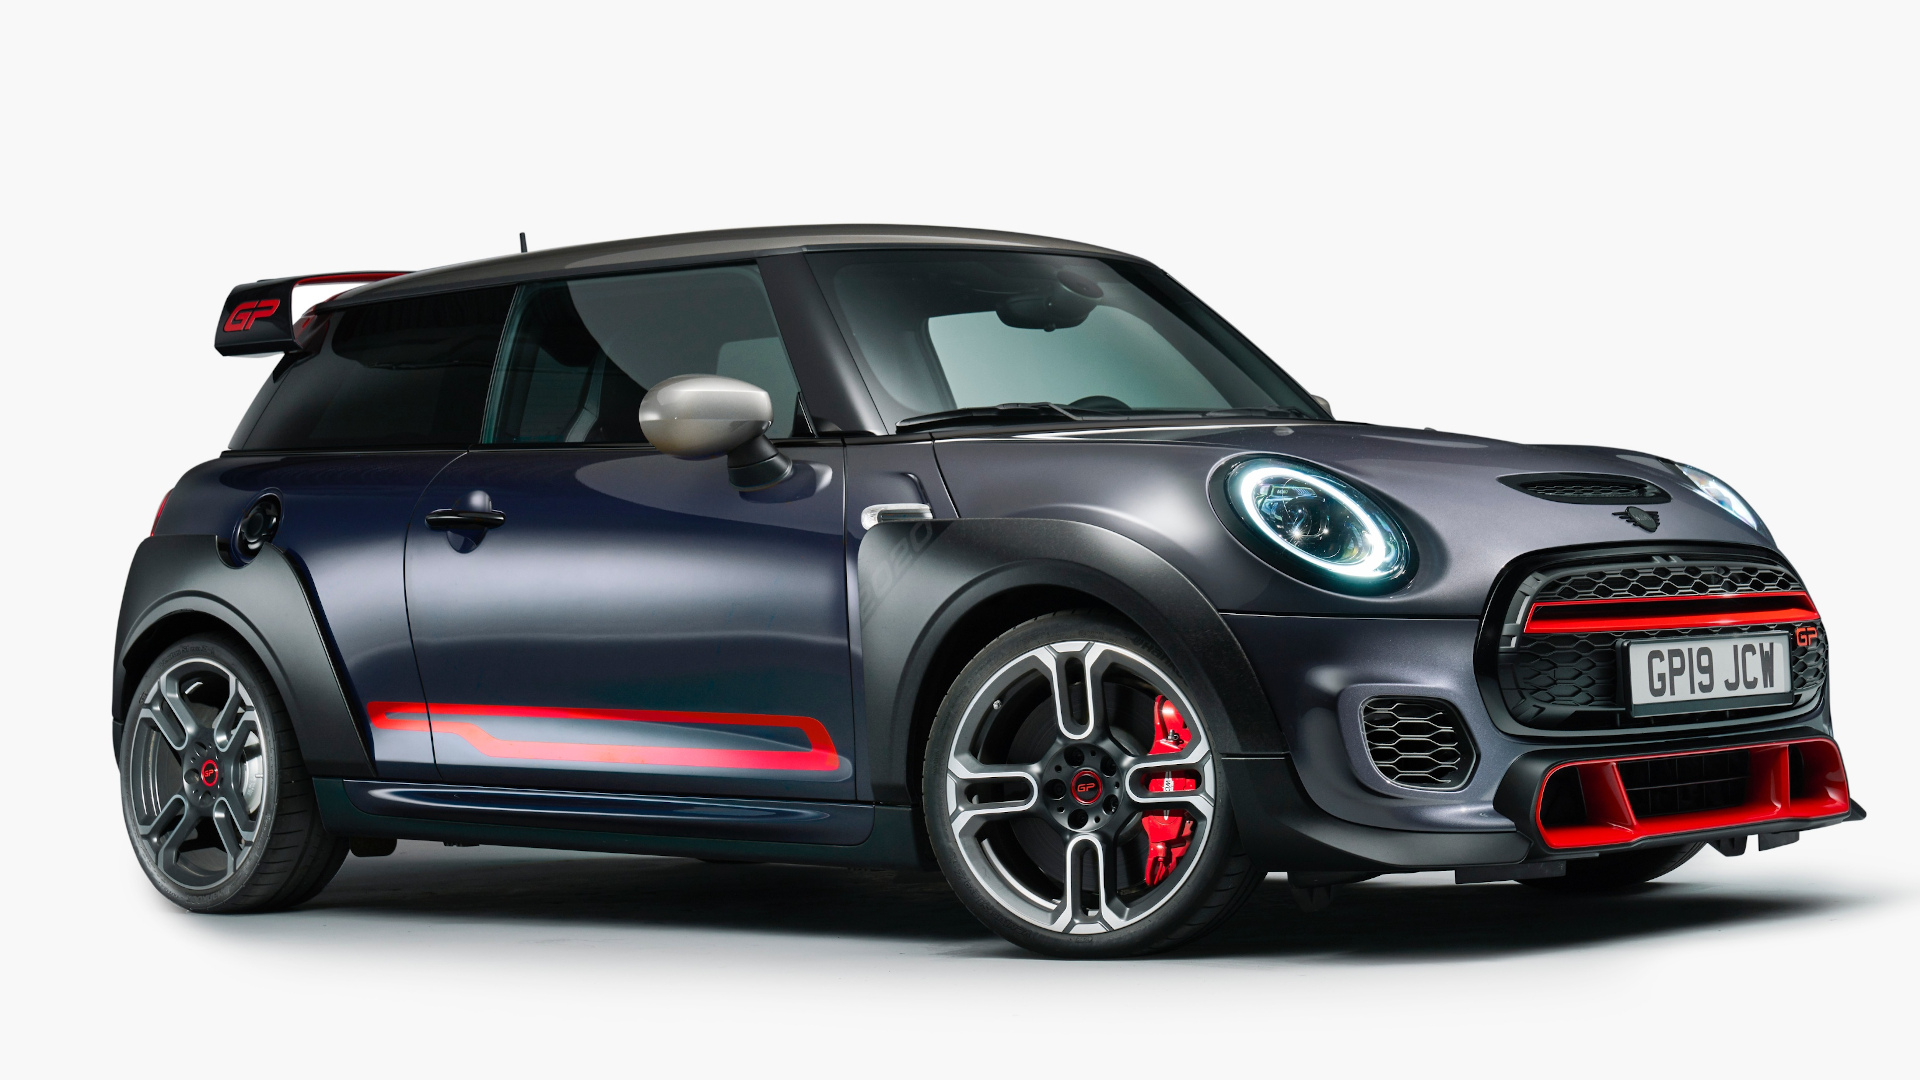 The 302hp Mini John Cooper Works GP is now available in PH* for P4.8M Autohub Group